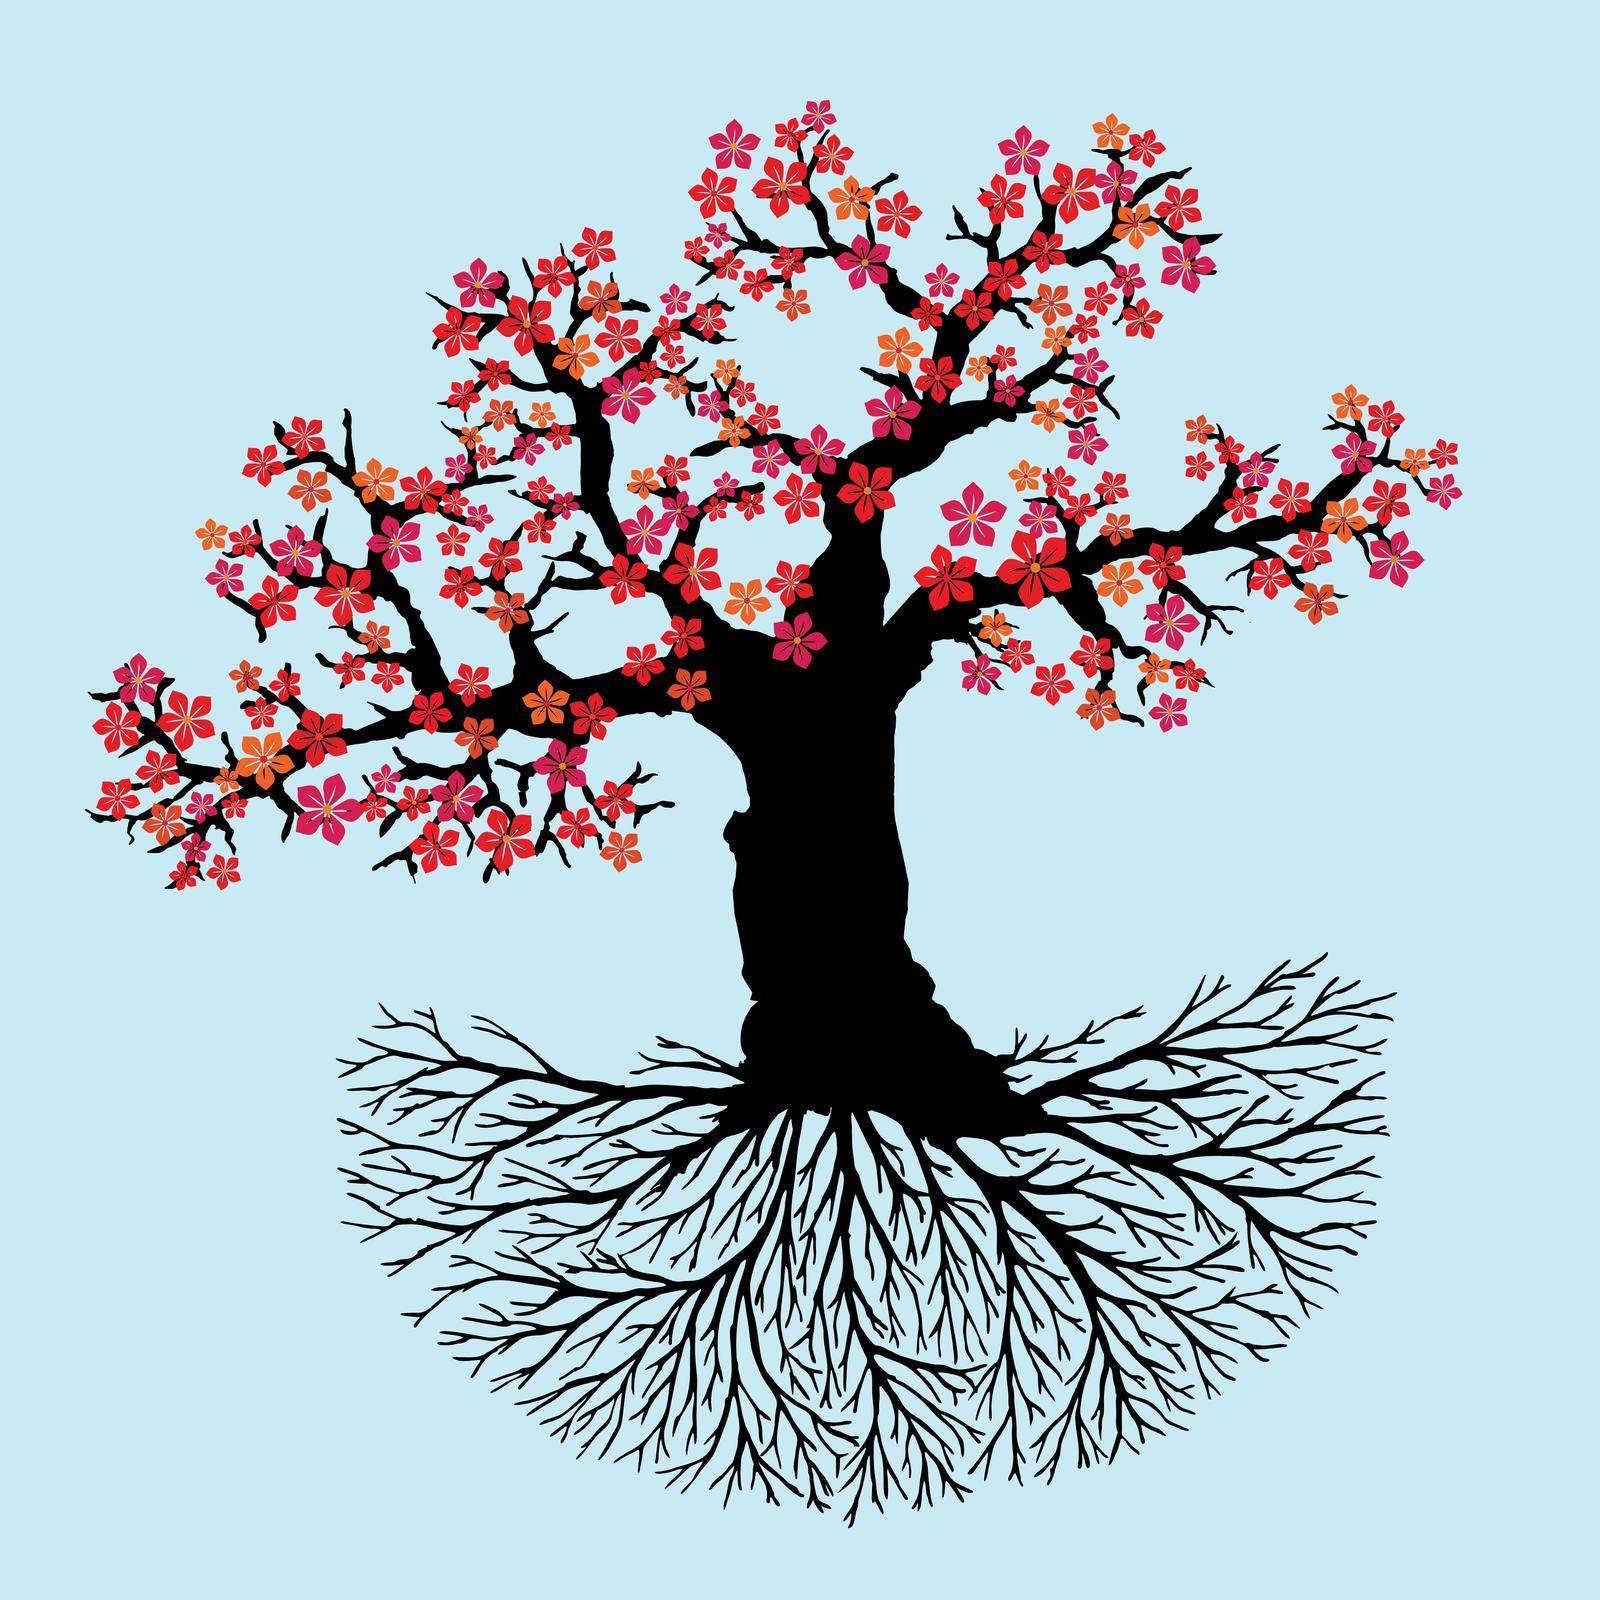 Old blossom tree of life or yggdrasil with red blossoms. The trunk, branches and roots are black. Light blue background.